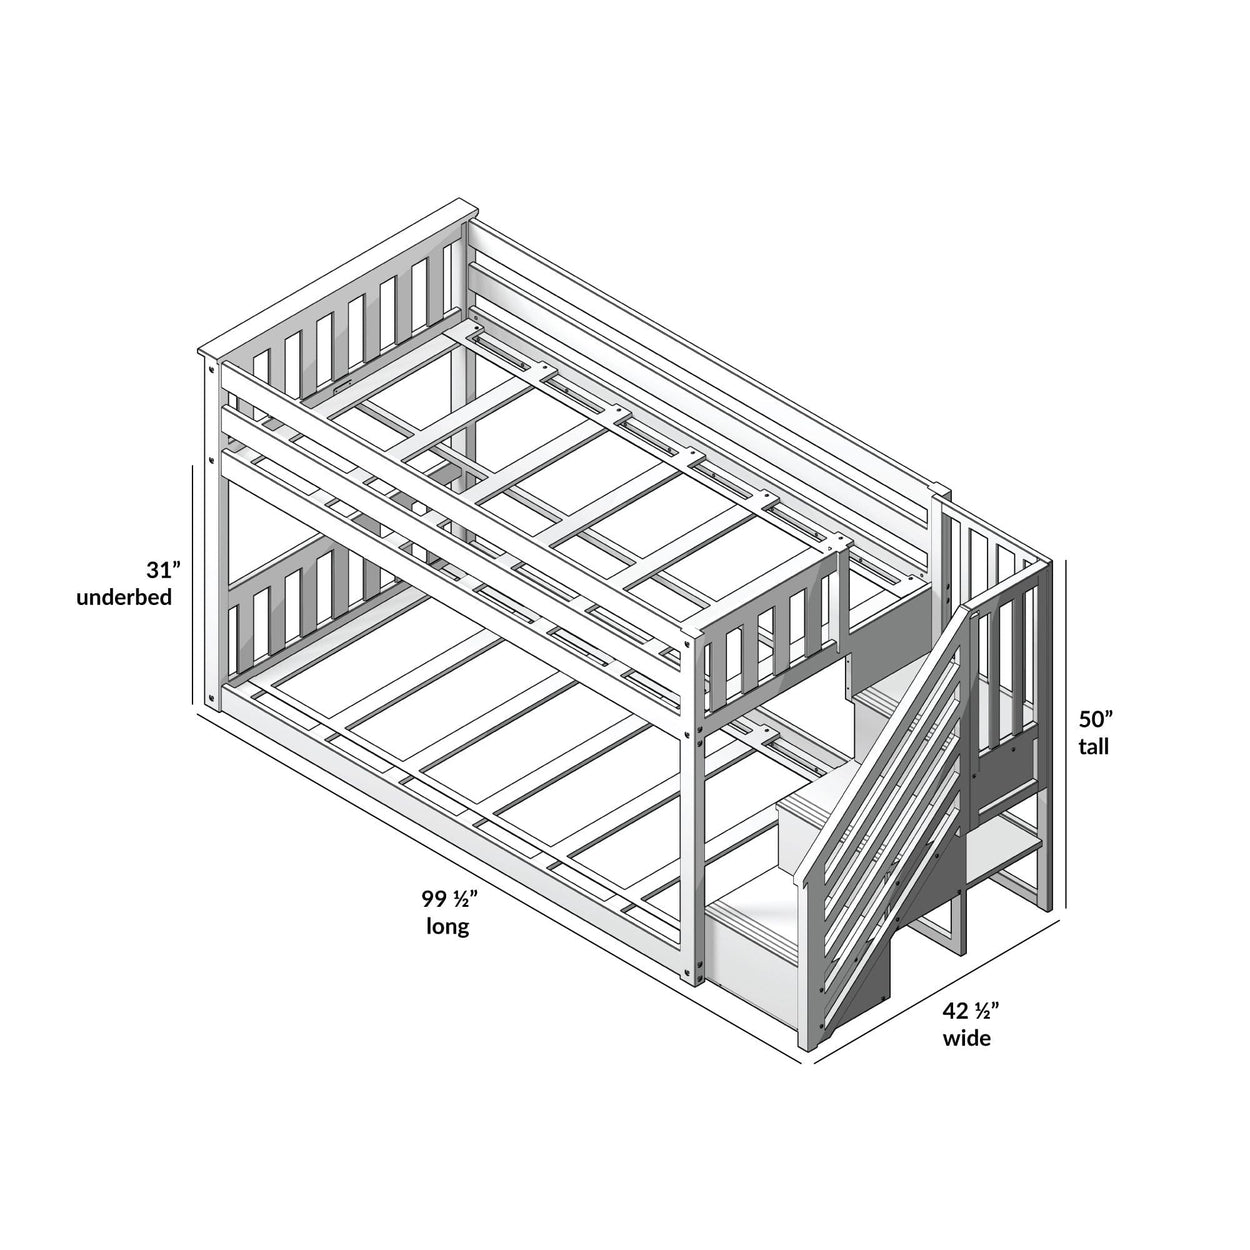 185220-151 : Bunk Beds Twin over Twin Low Bunk Bed with Staircase, Clay